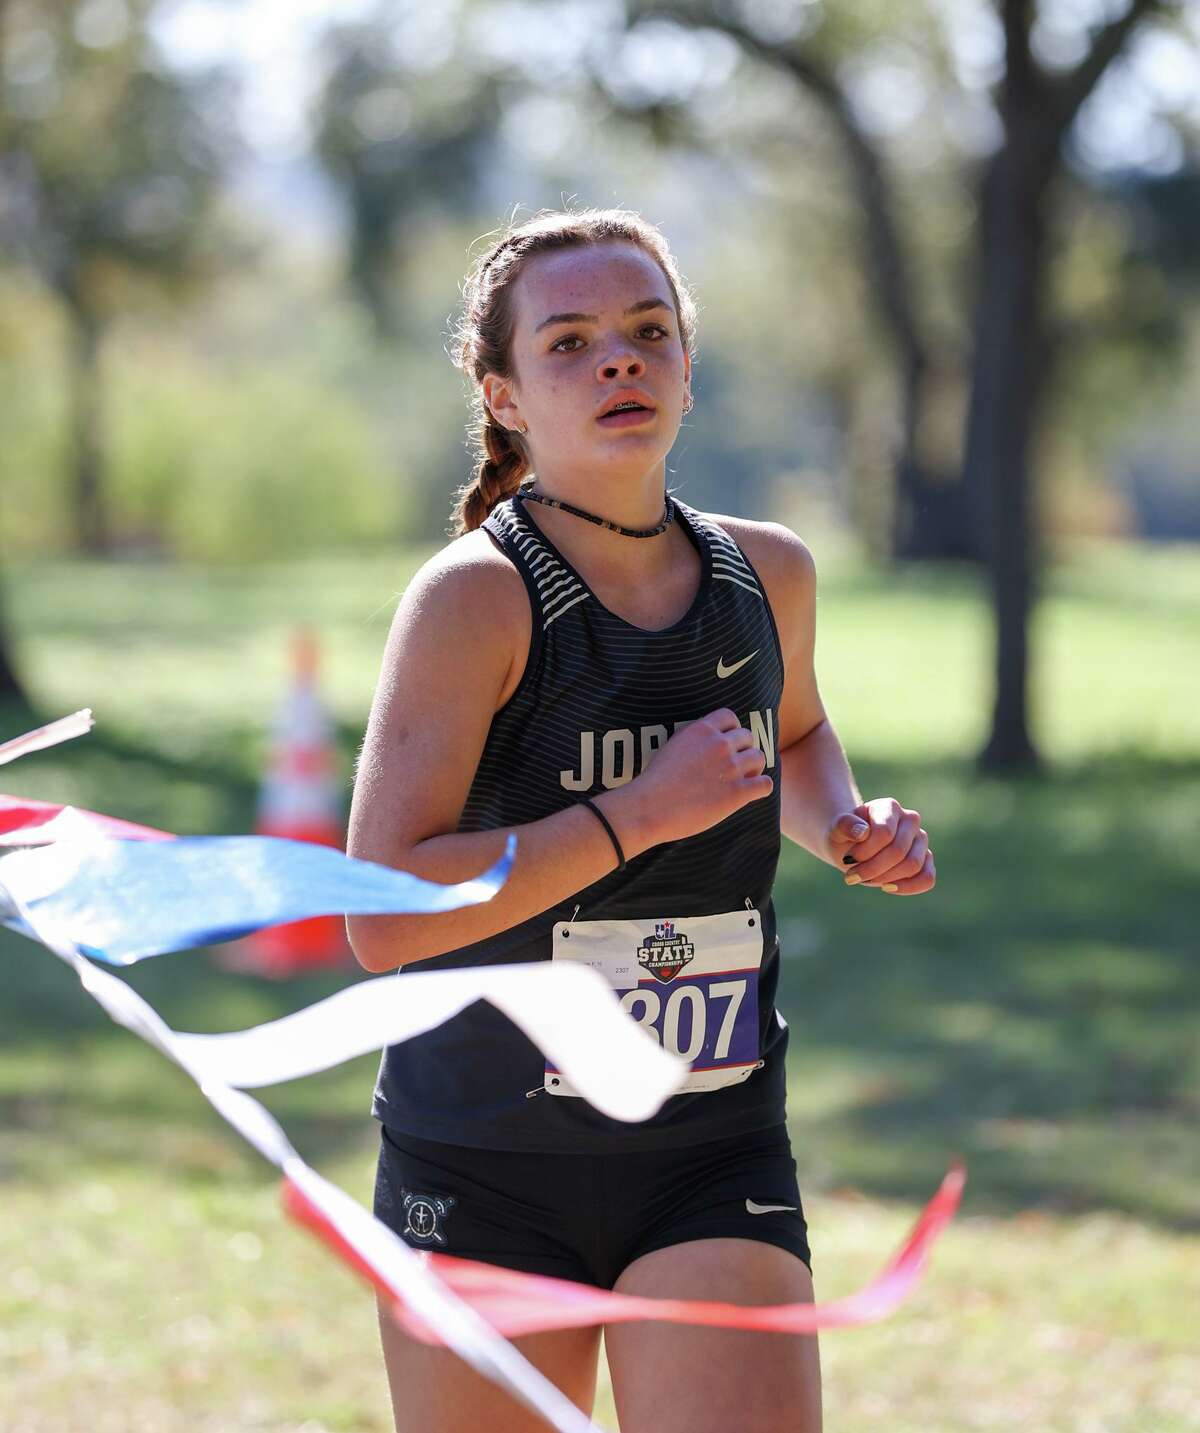 MJ Leviaguirre (2307) of Katy Jordan runs in the girls Class 5A state cross country meet on November 5, 2021 in Round Rock, Texas.